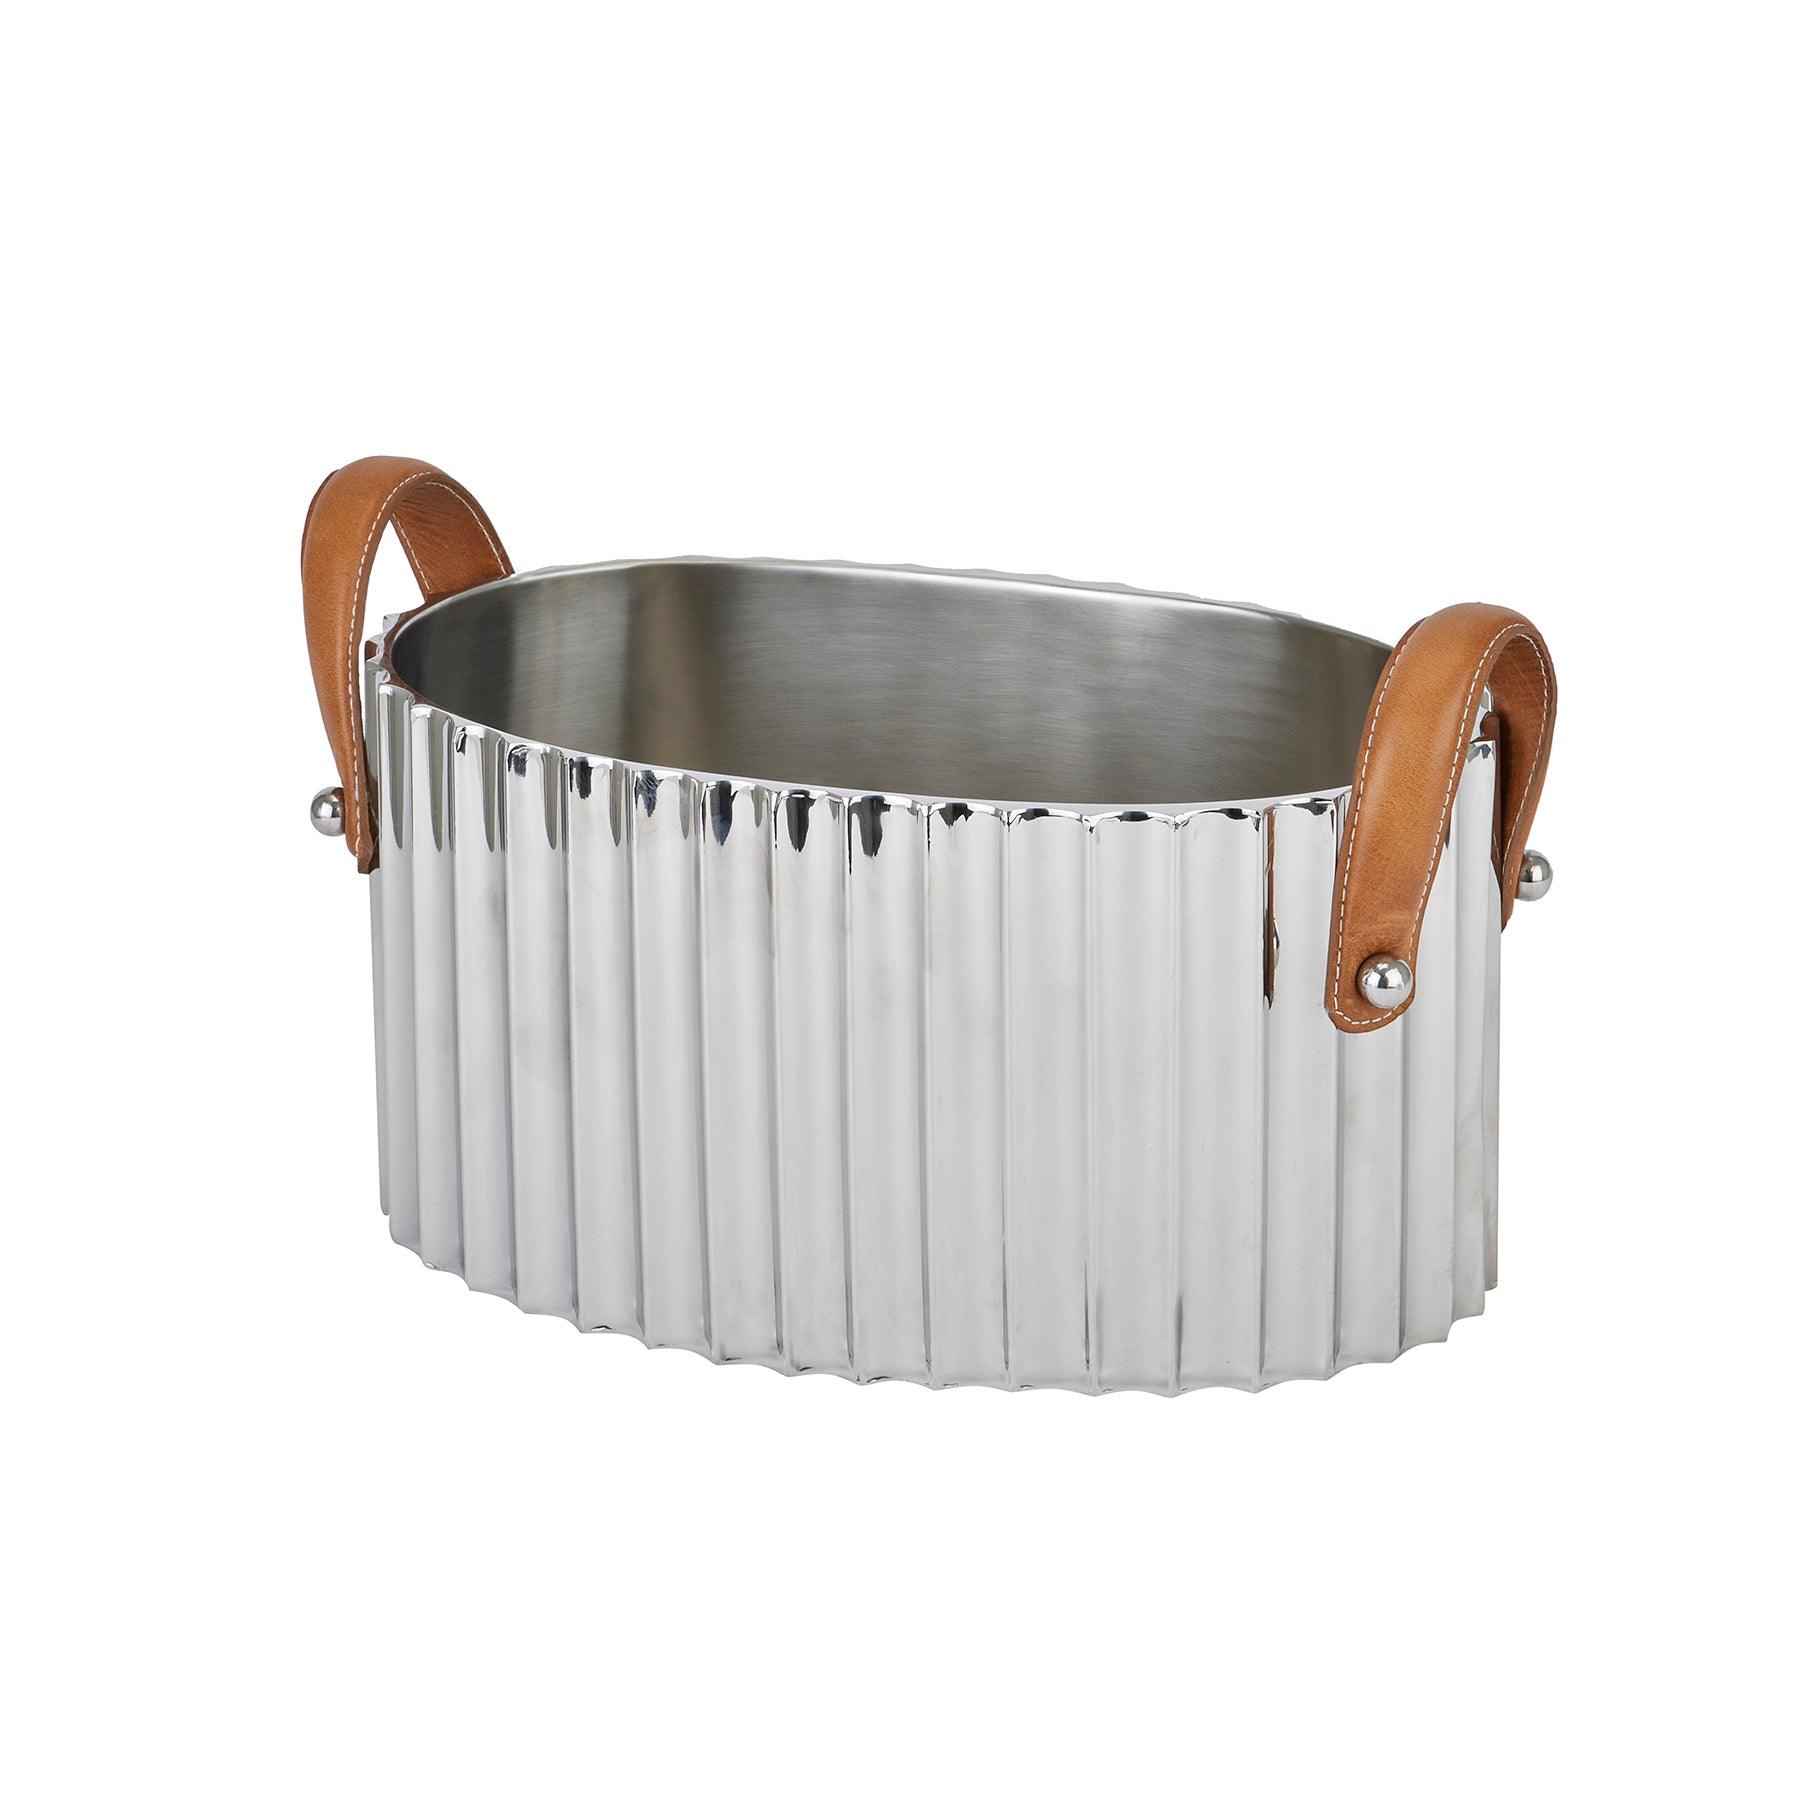 View Large Silver Fluted Leather Handled Champagne Cooler information